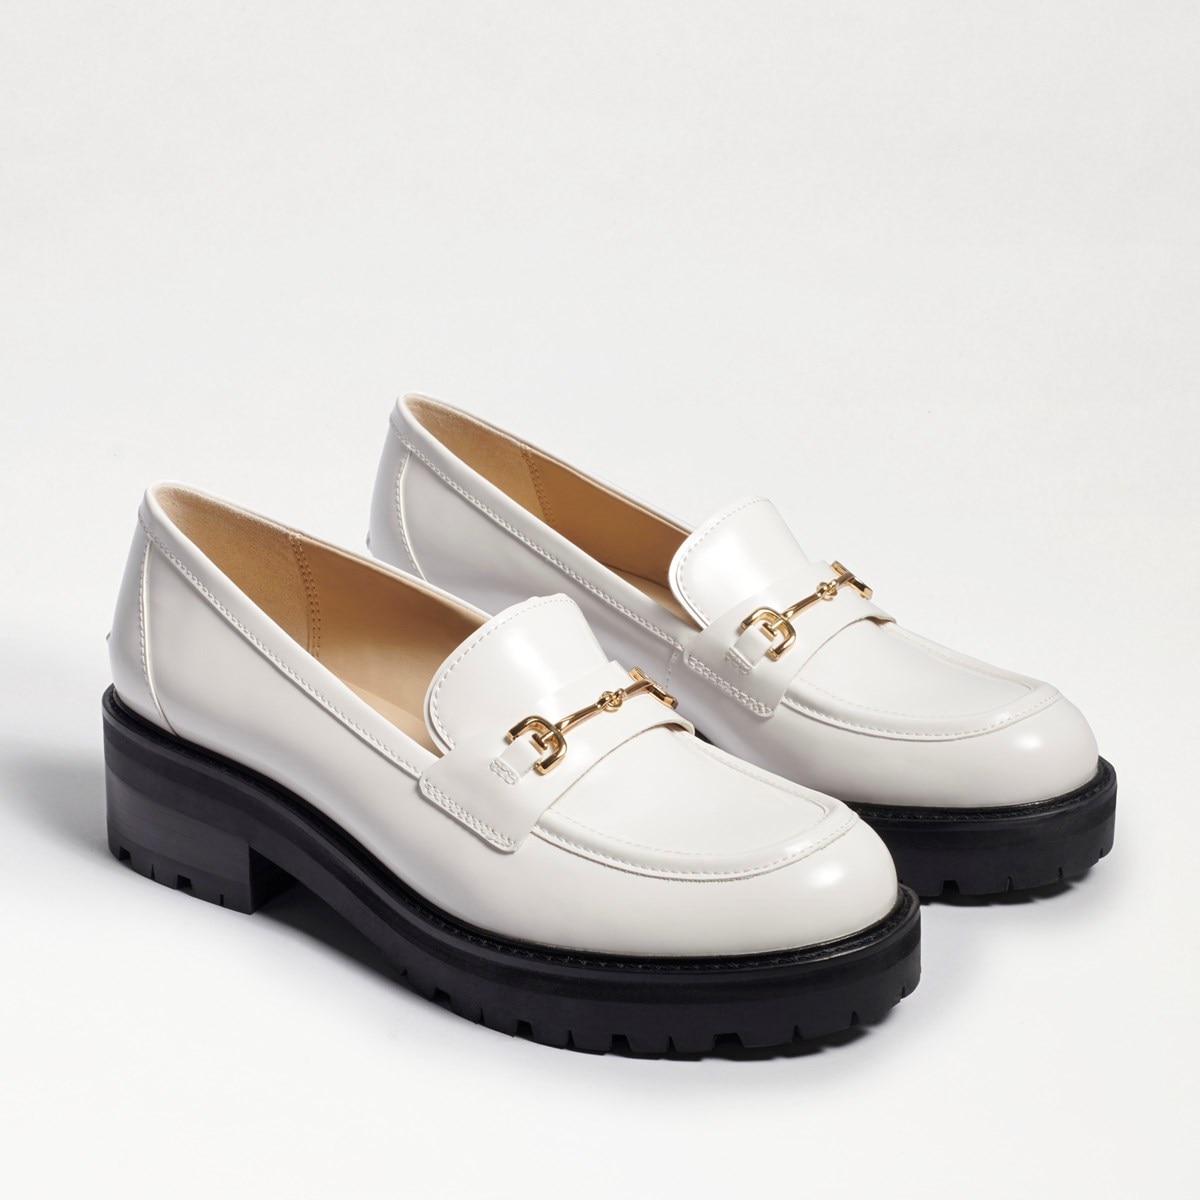 Tully Lug Sole Loafer - Pair